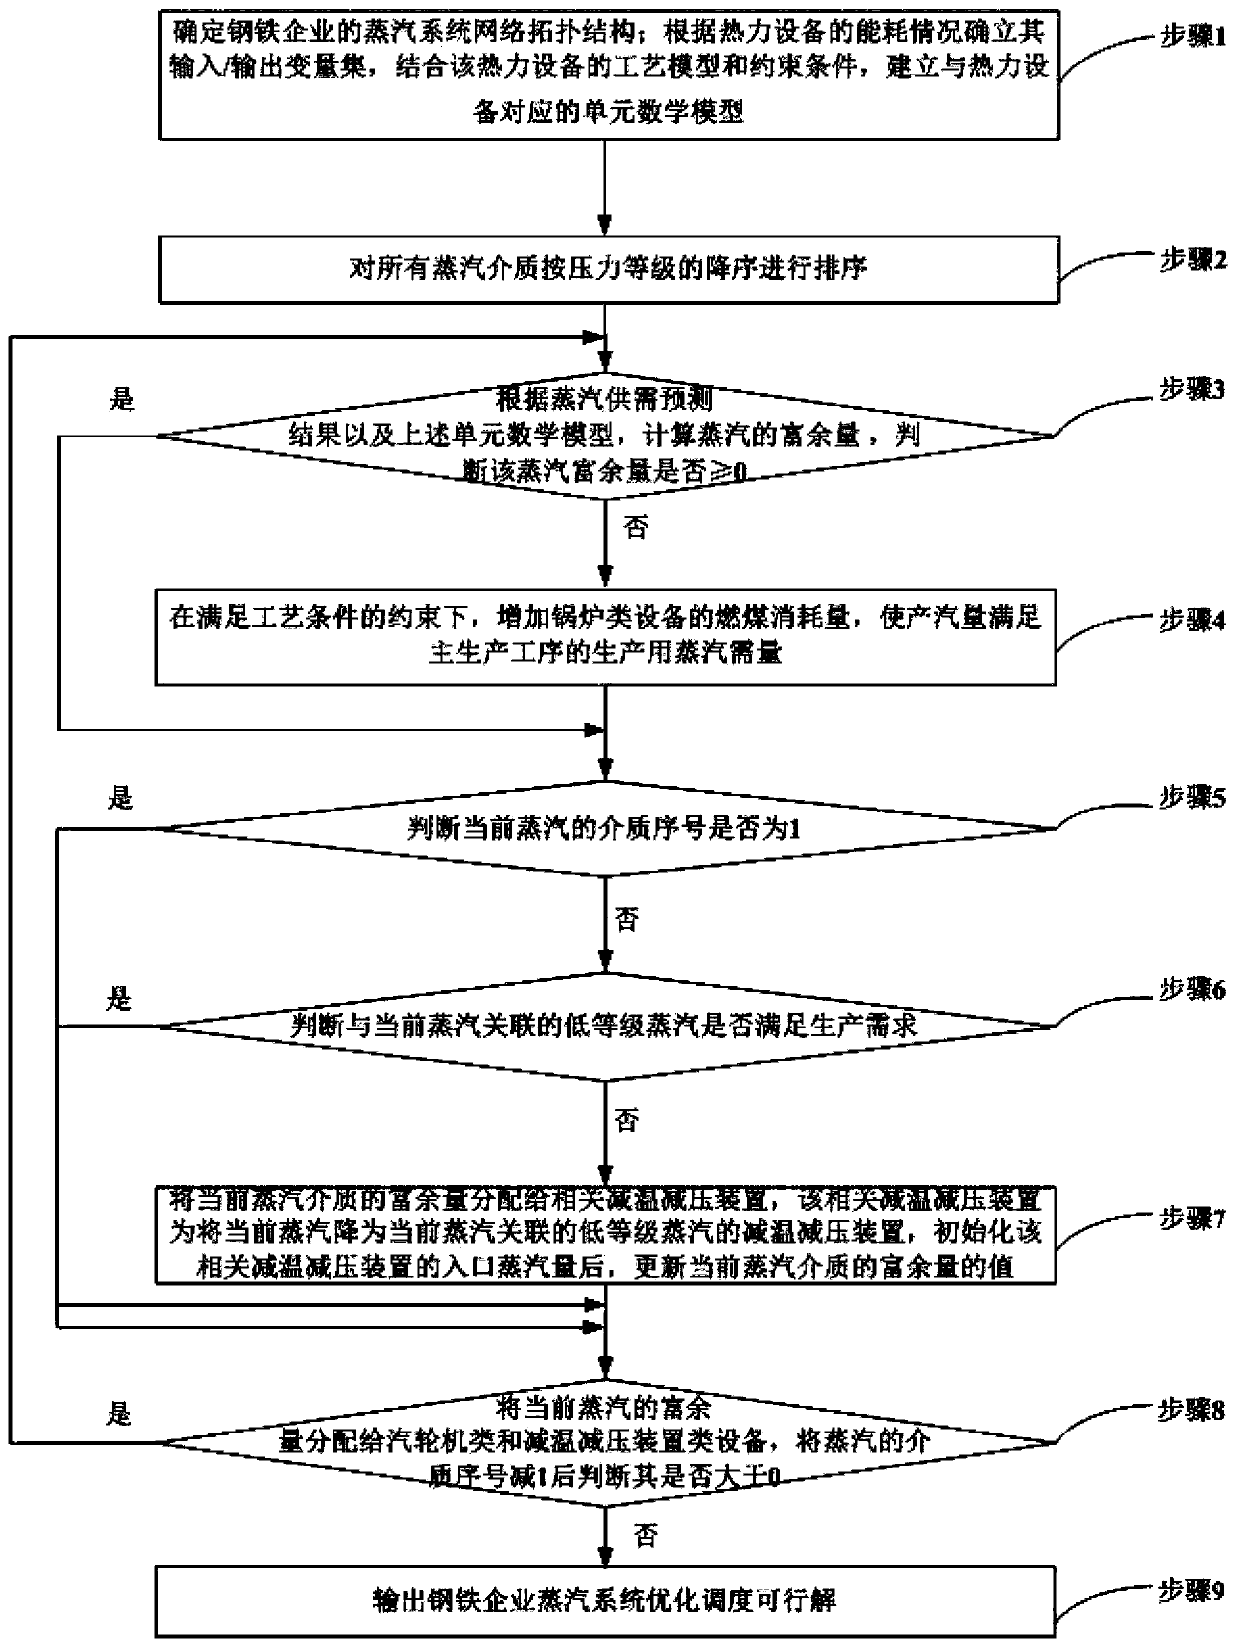 A Method for Determining the Feasible Solution of Steam System Optimal Scheduling in Iron and Steel Enterprises